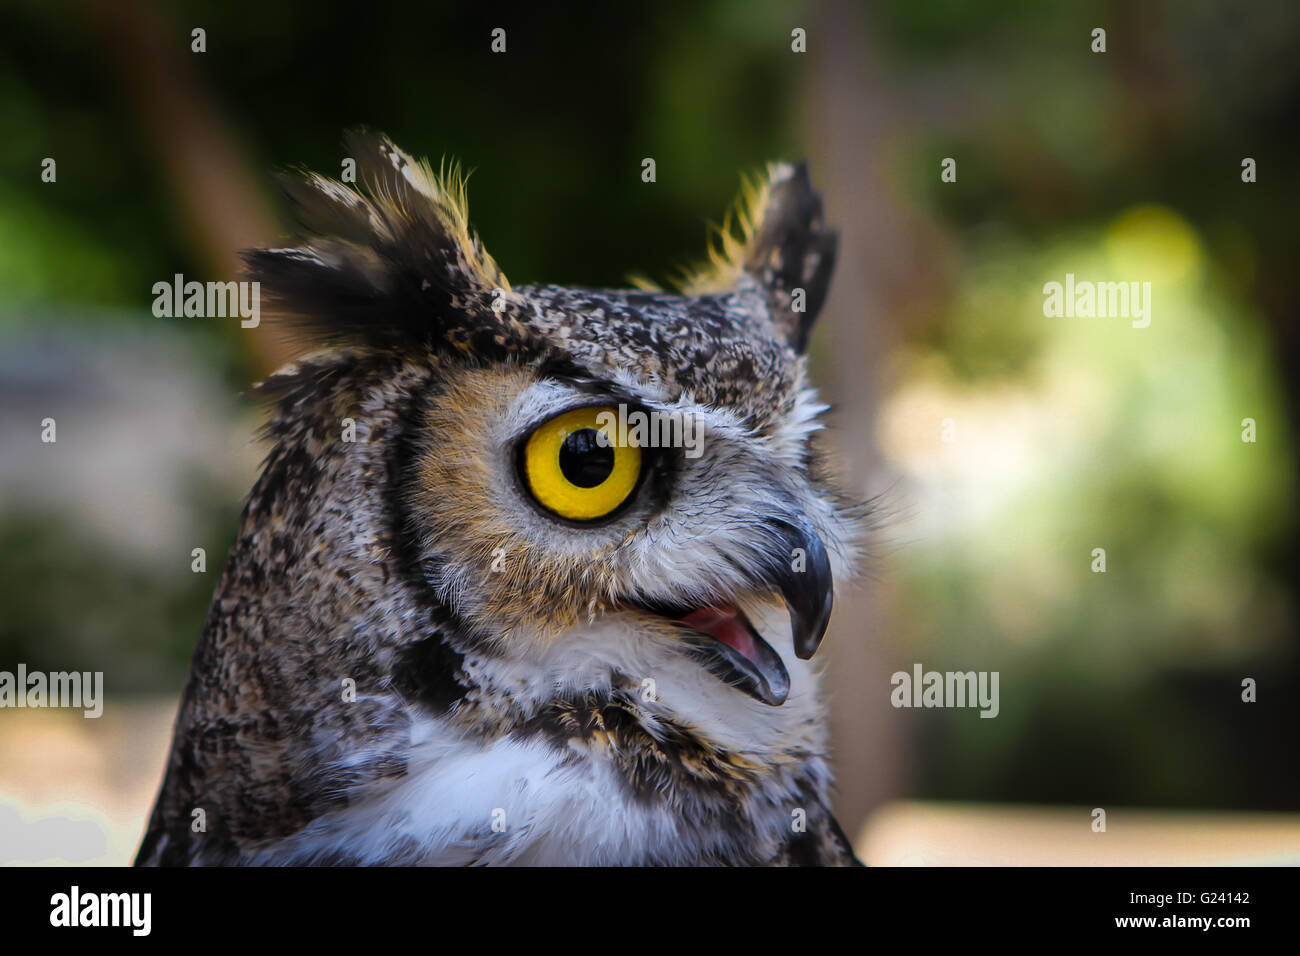 Closeup of a screeching Great Horned Owl (Bubo virginianus) in Bandelier National Monument, Side View Stock Photo